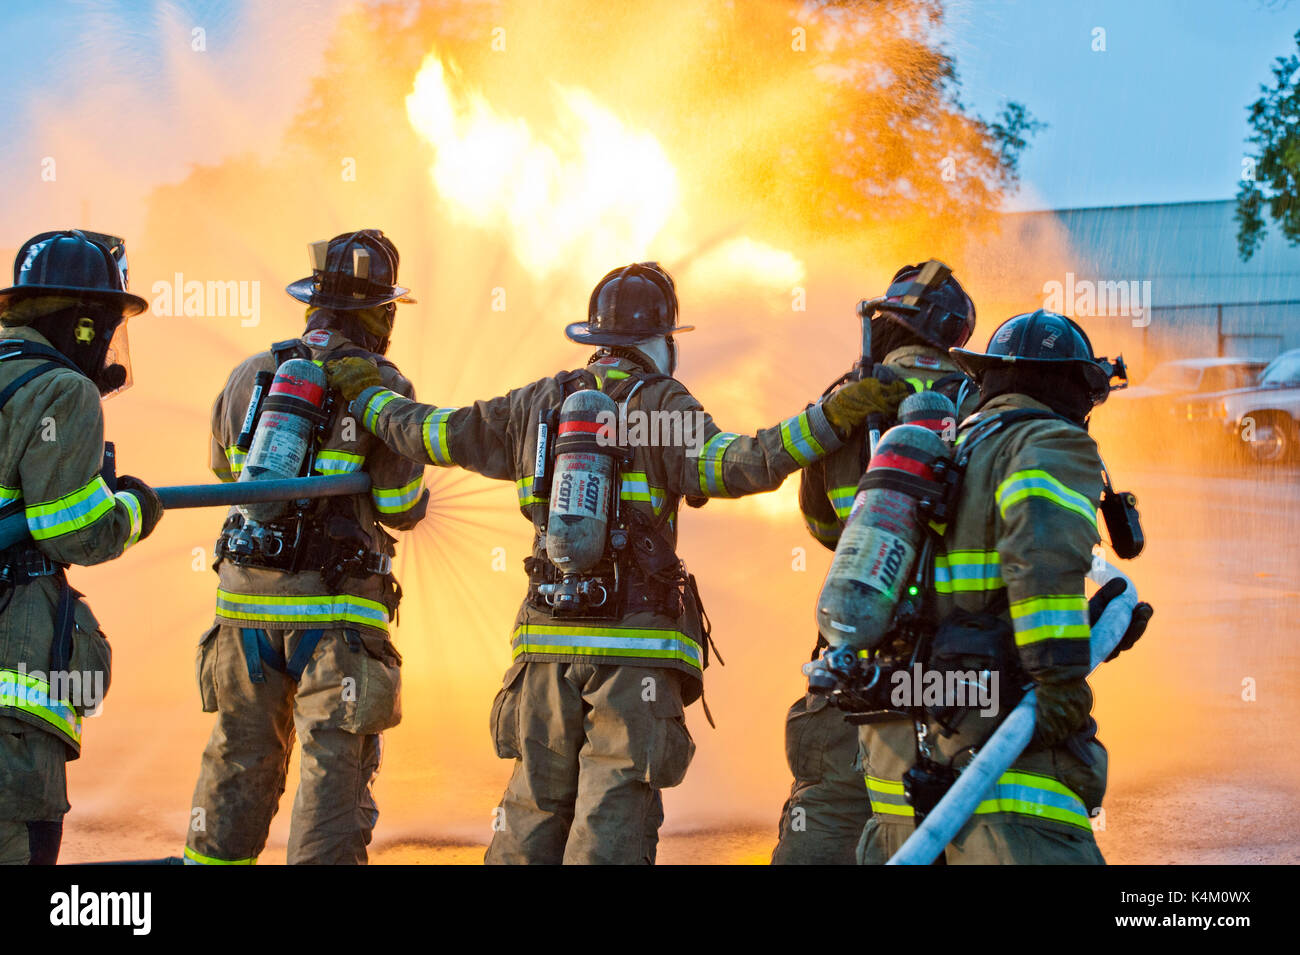 FIREFIGHTERS TRAINING WITH WATER HOSE TO PUT OUT TANK FIRES, LANCASTER PENNSYLVANIA Stock Photo